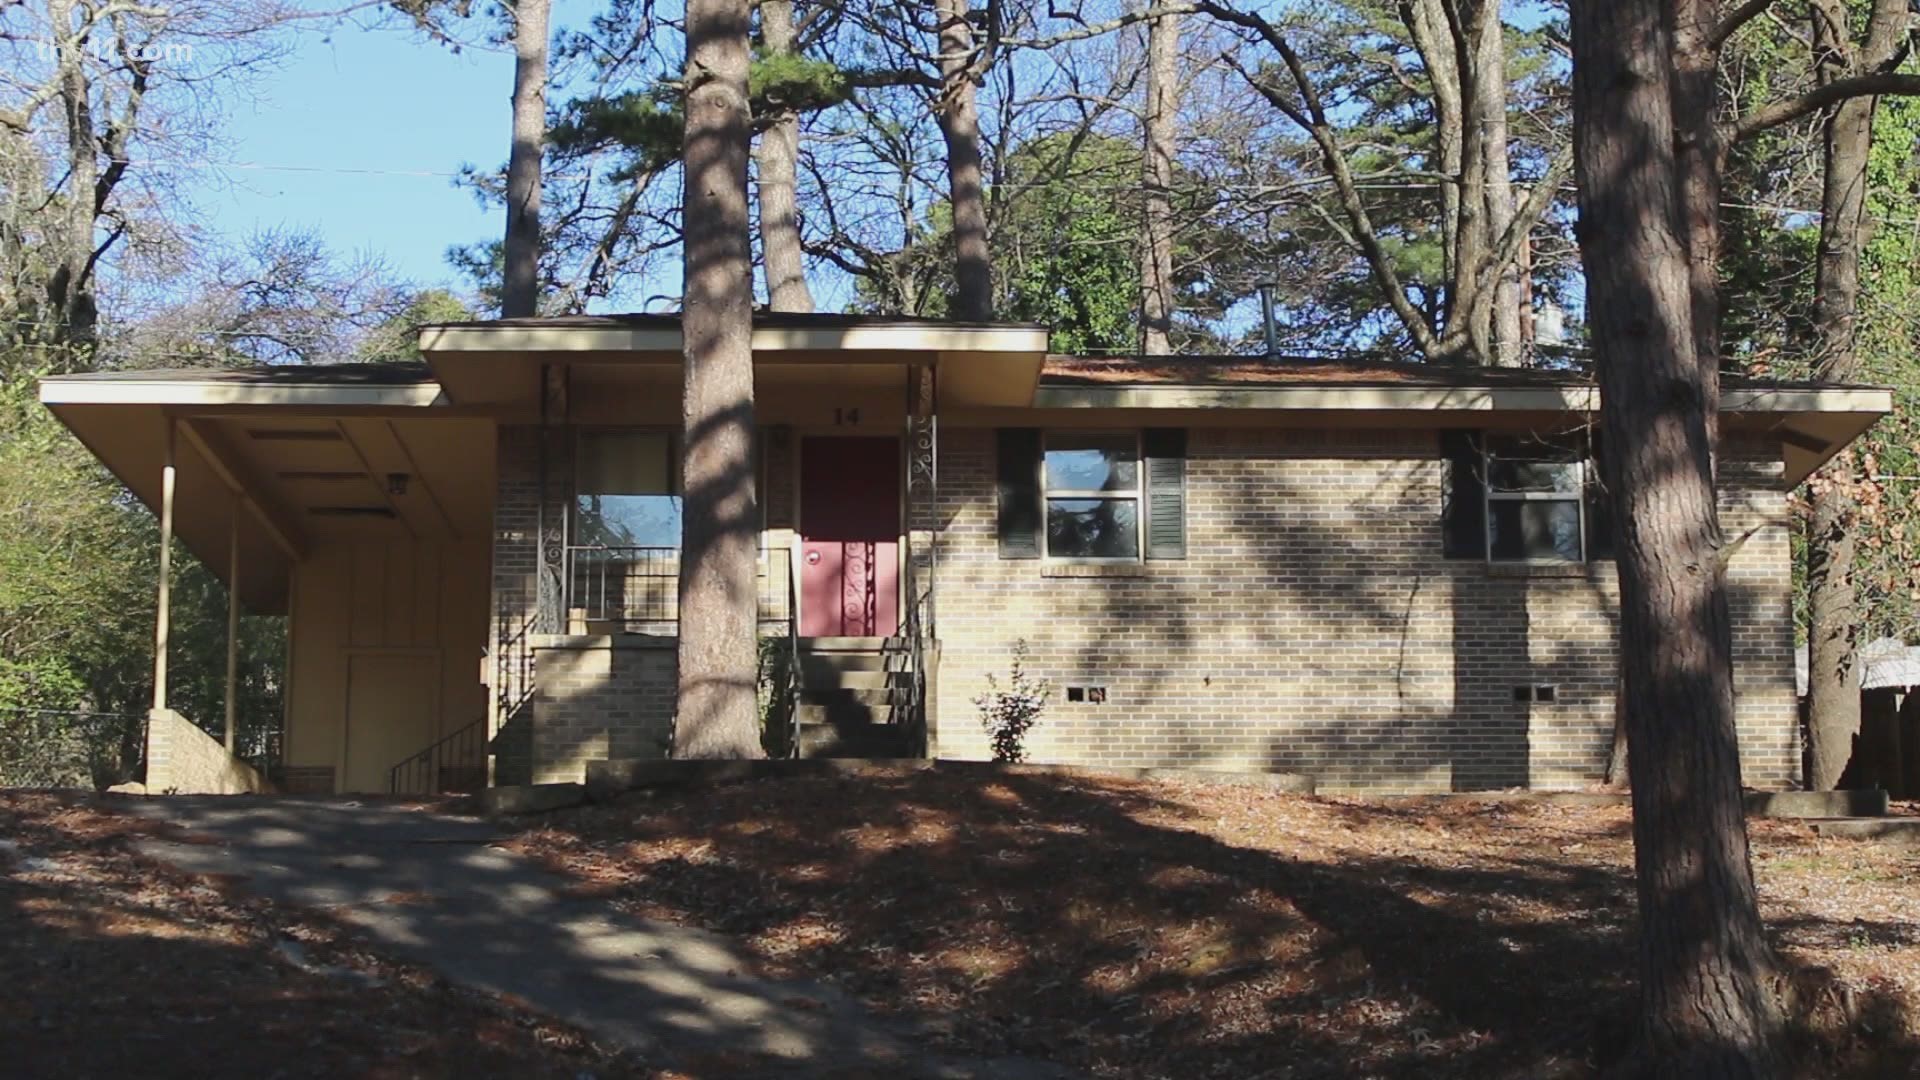 Police in Little Rock are investigating after a woman was found dead at a home.